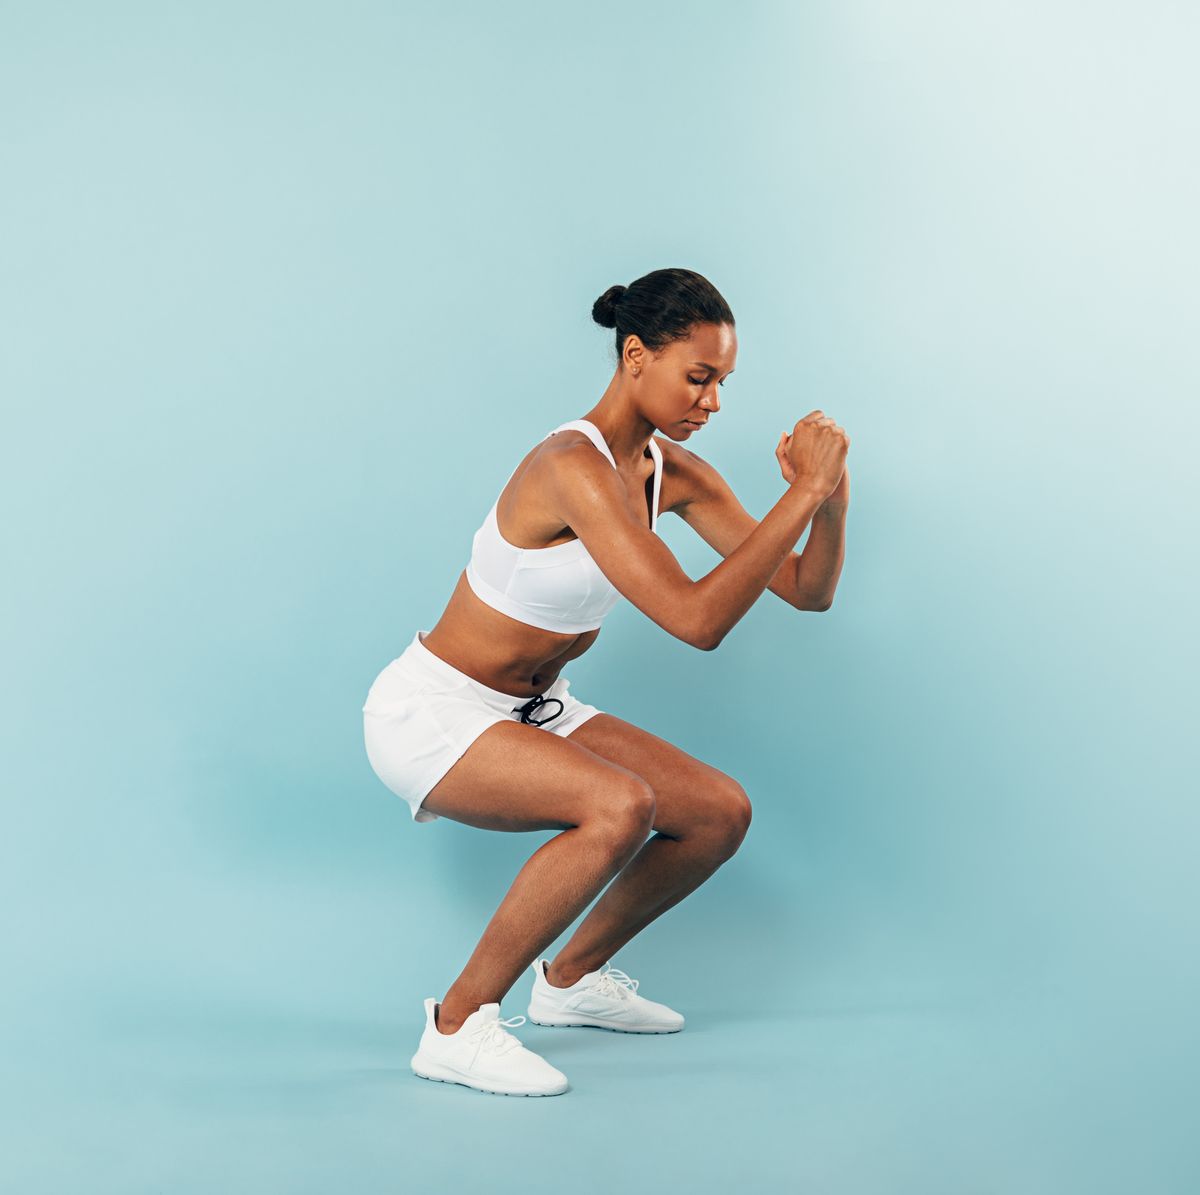 15 At-Home Butt Exercises: With Bands and Weights